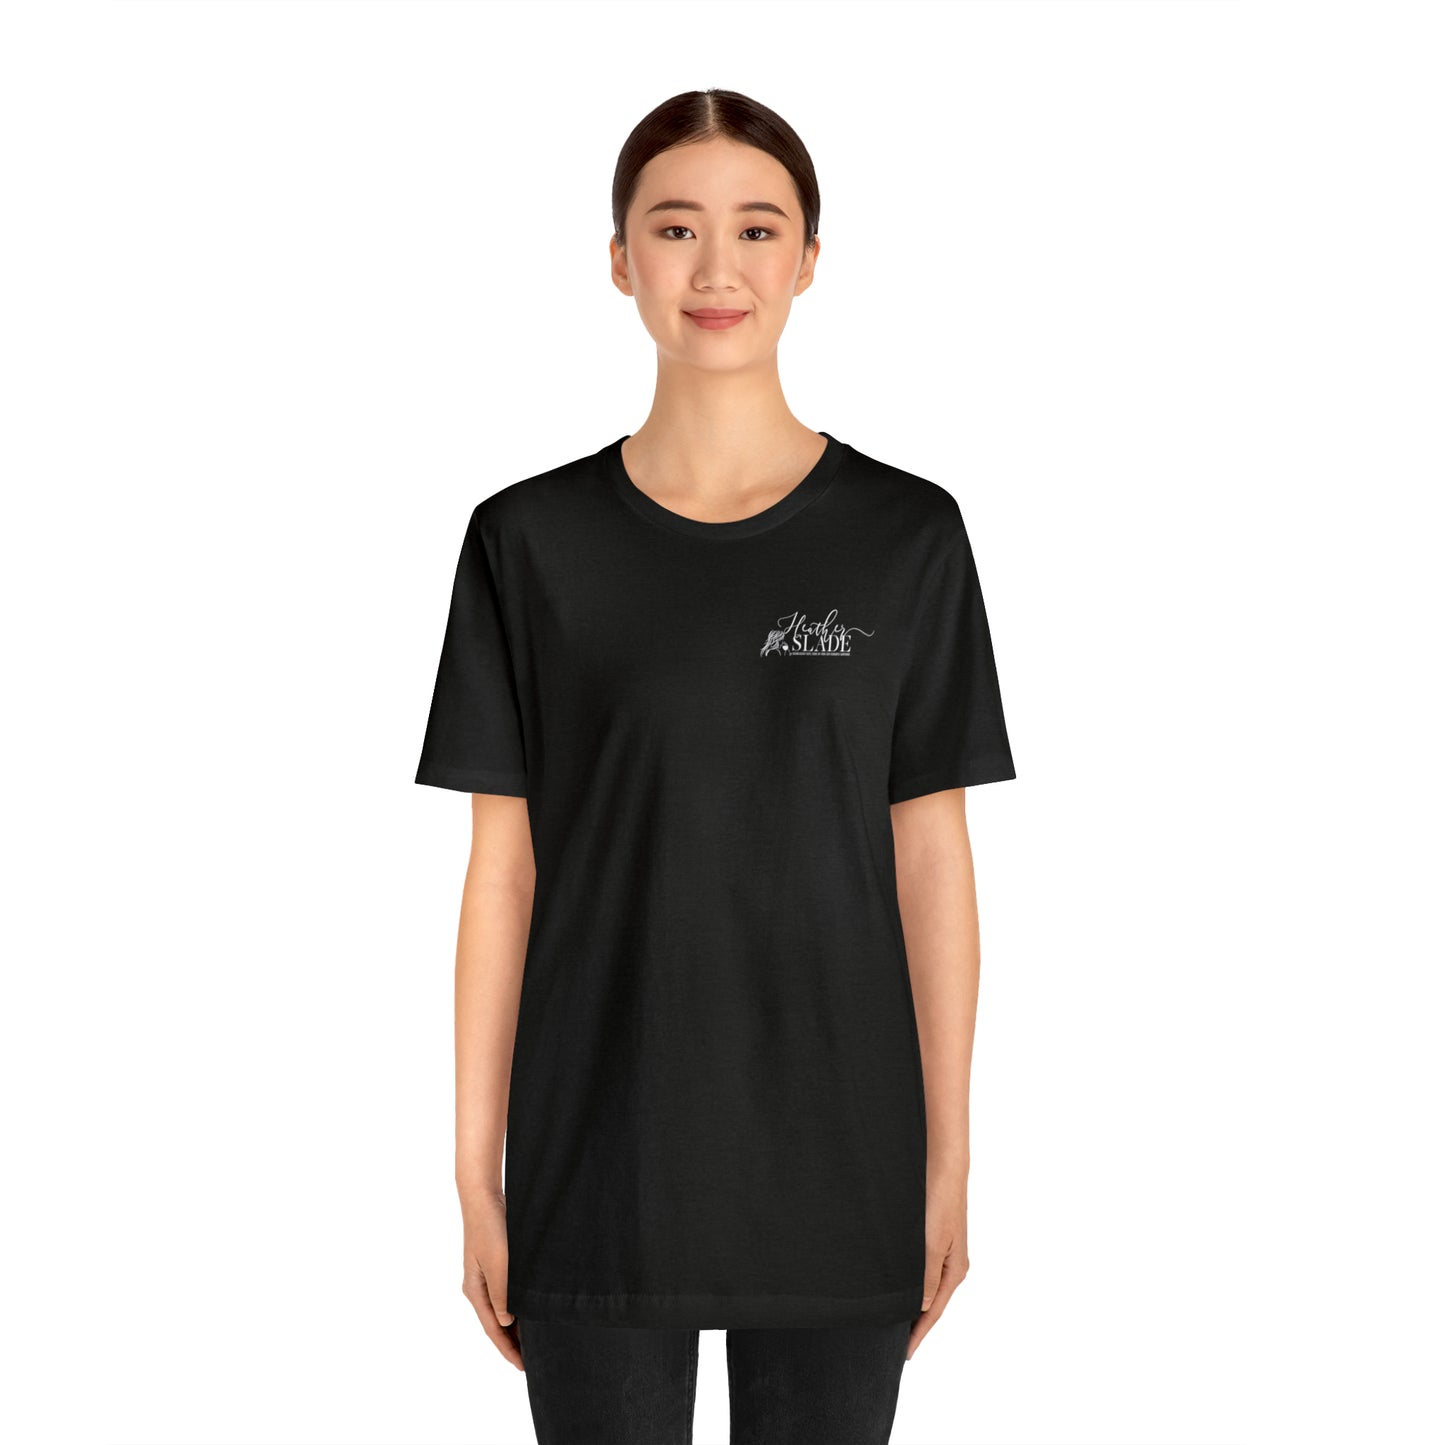 K19 Security Solutions Team One Jersey Short Sleeve Tee